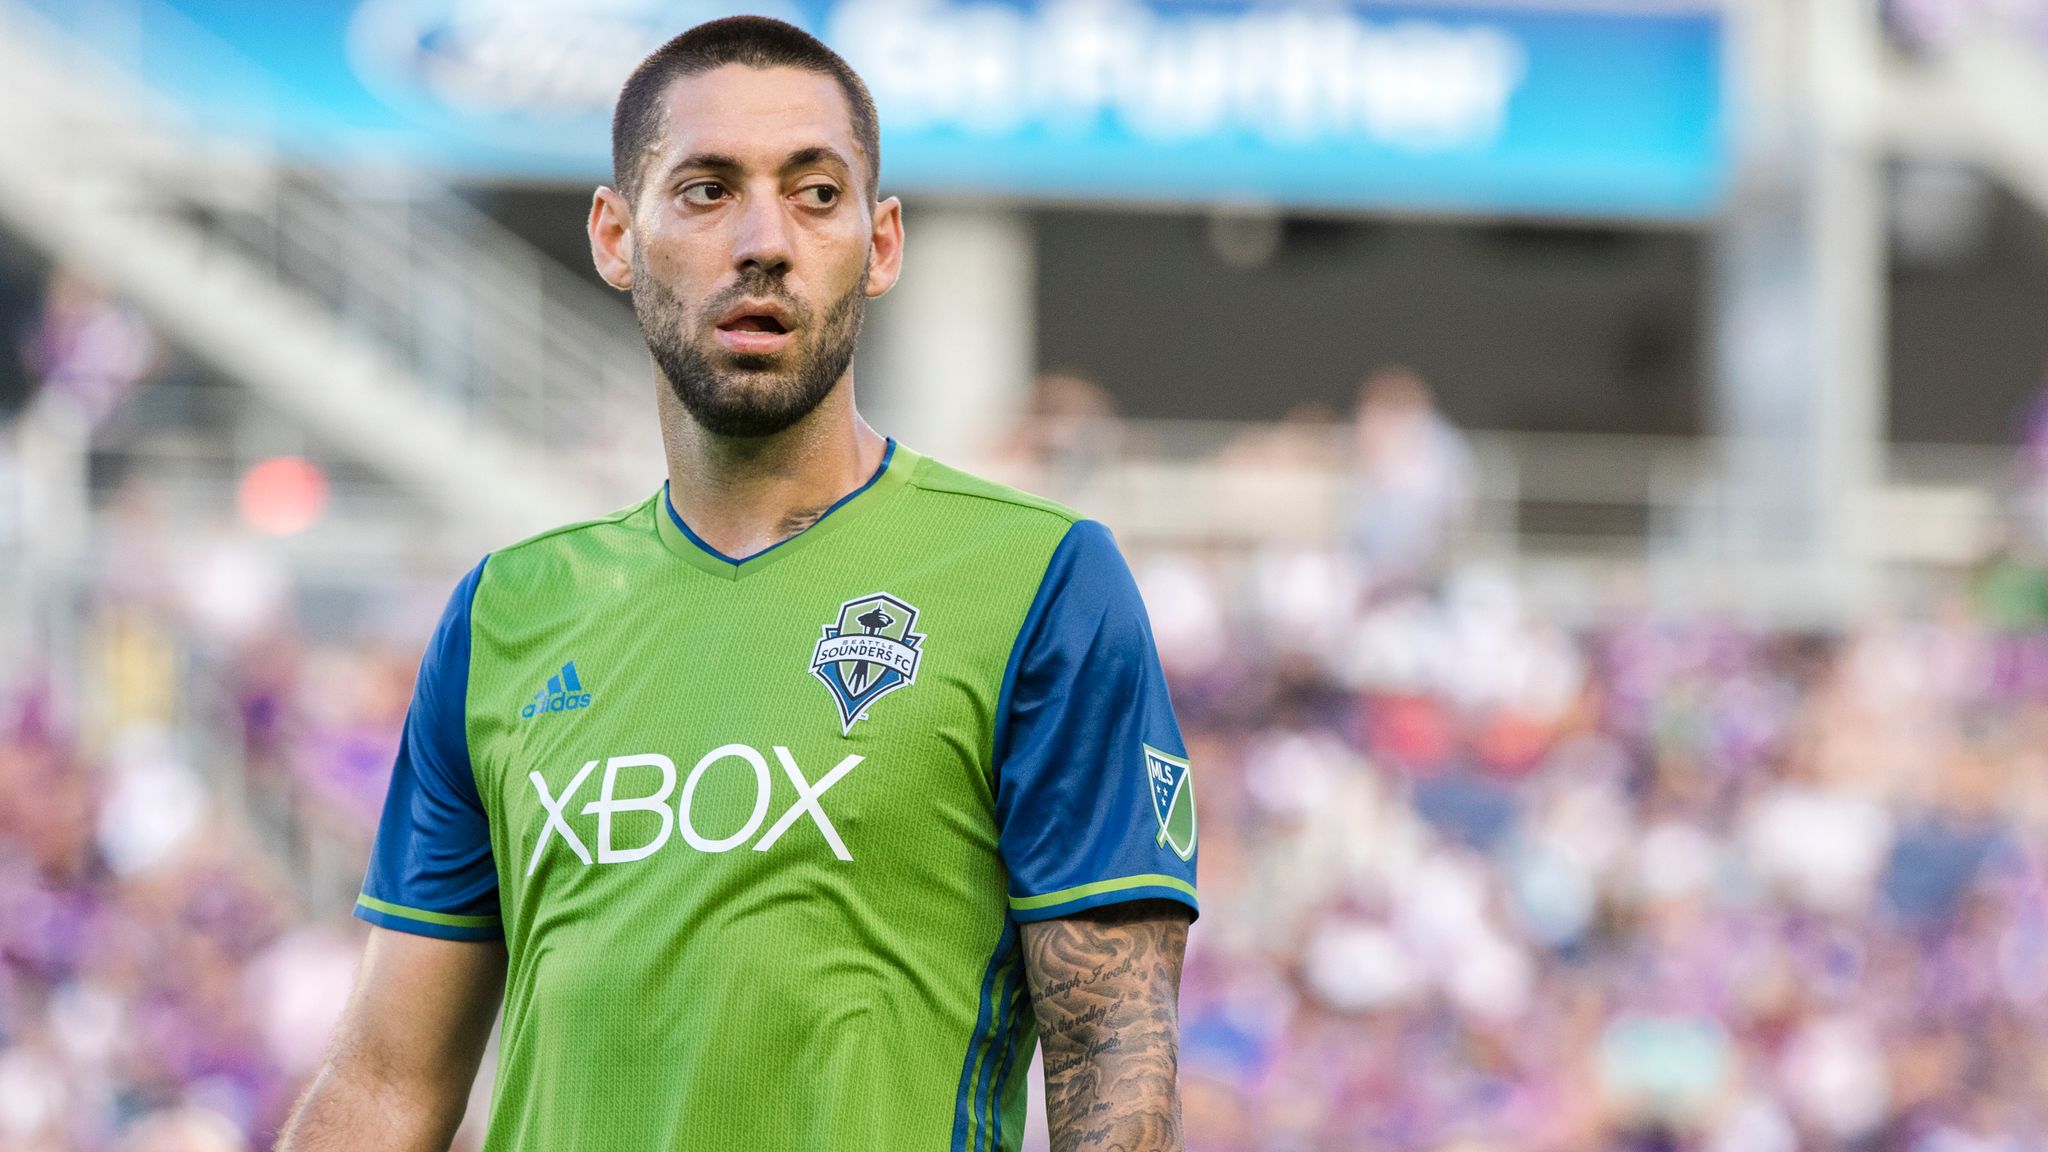 Clint Dempsey cleared to return for MLS champions Seattle Sounders, Football News